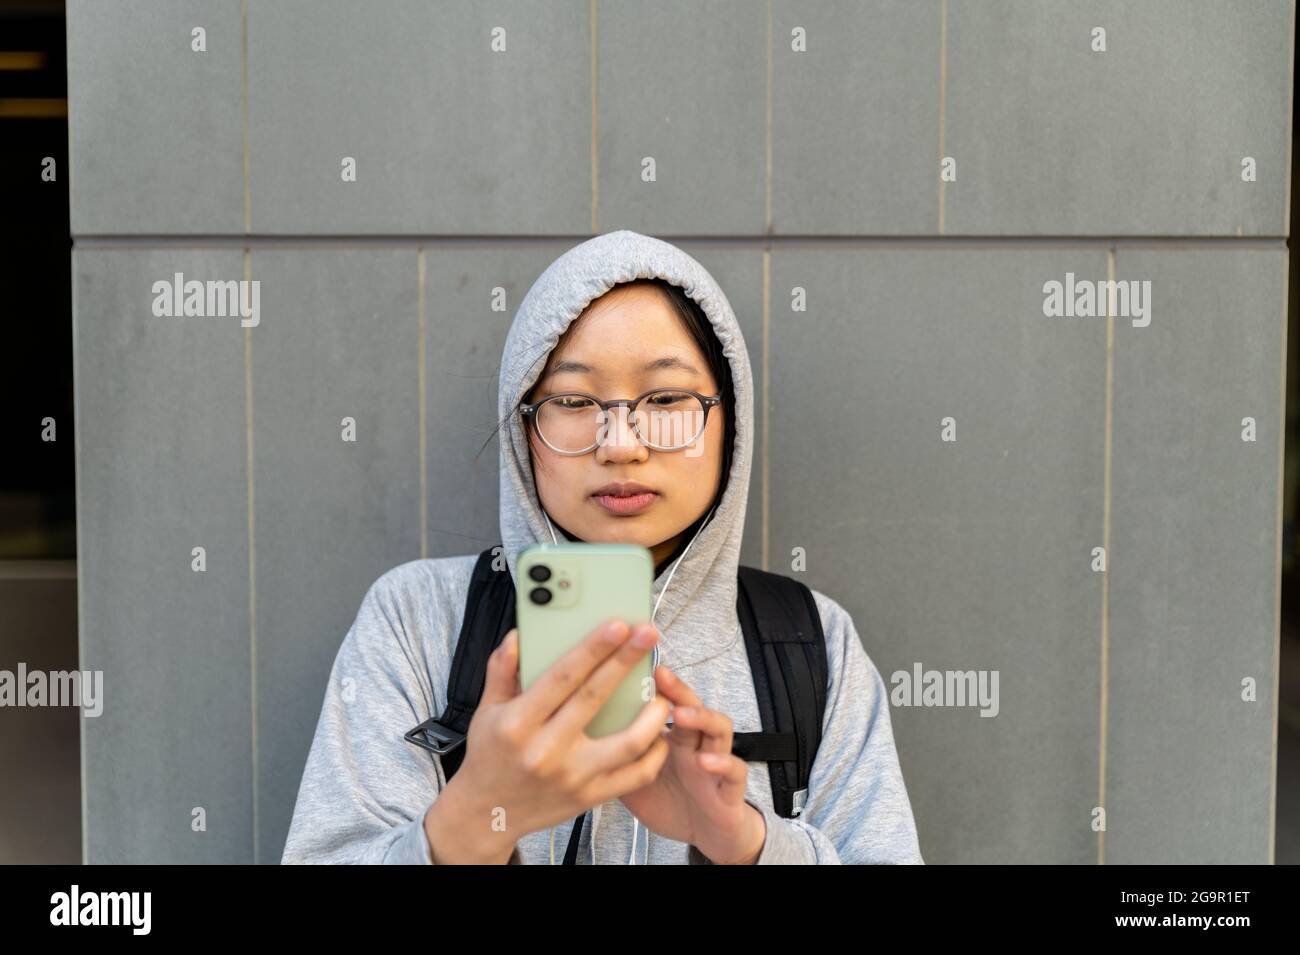 Young Asian adult using cell phone wearing glasses Stock Photo